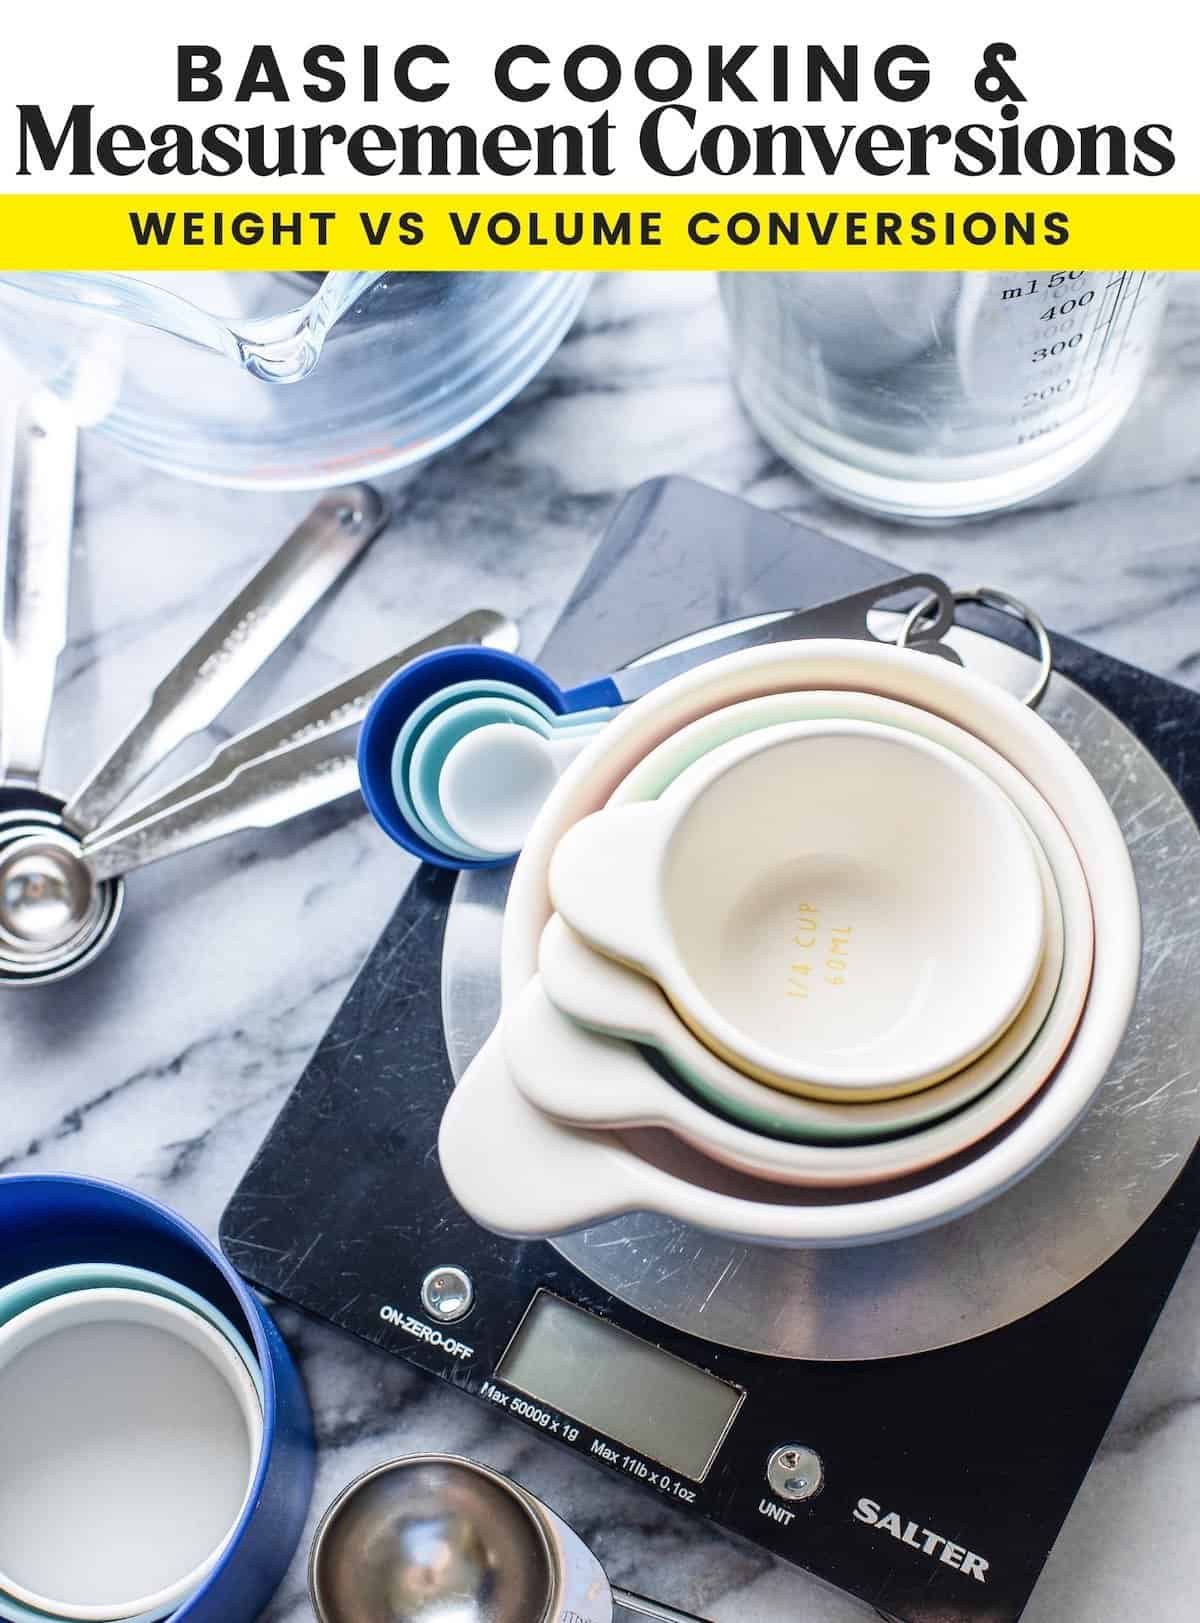 Cooking and Baking Conversions